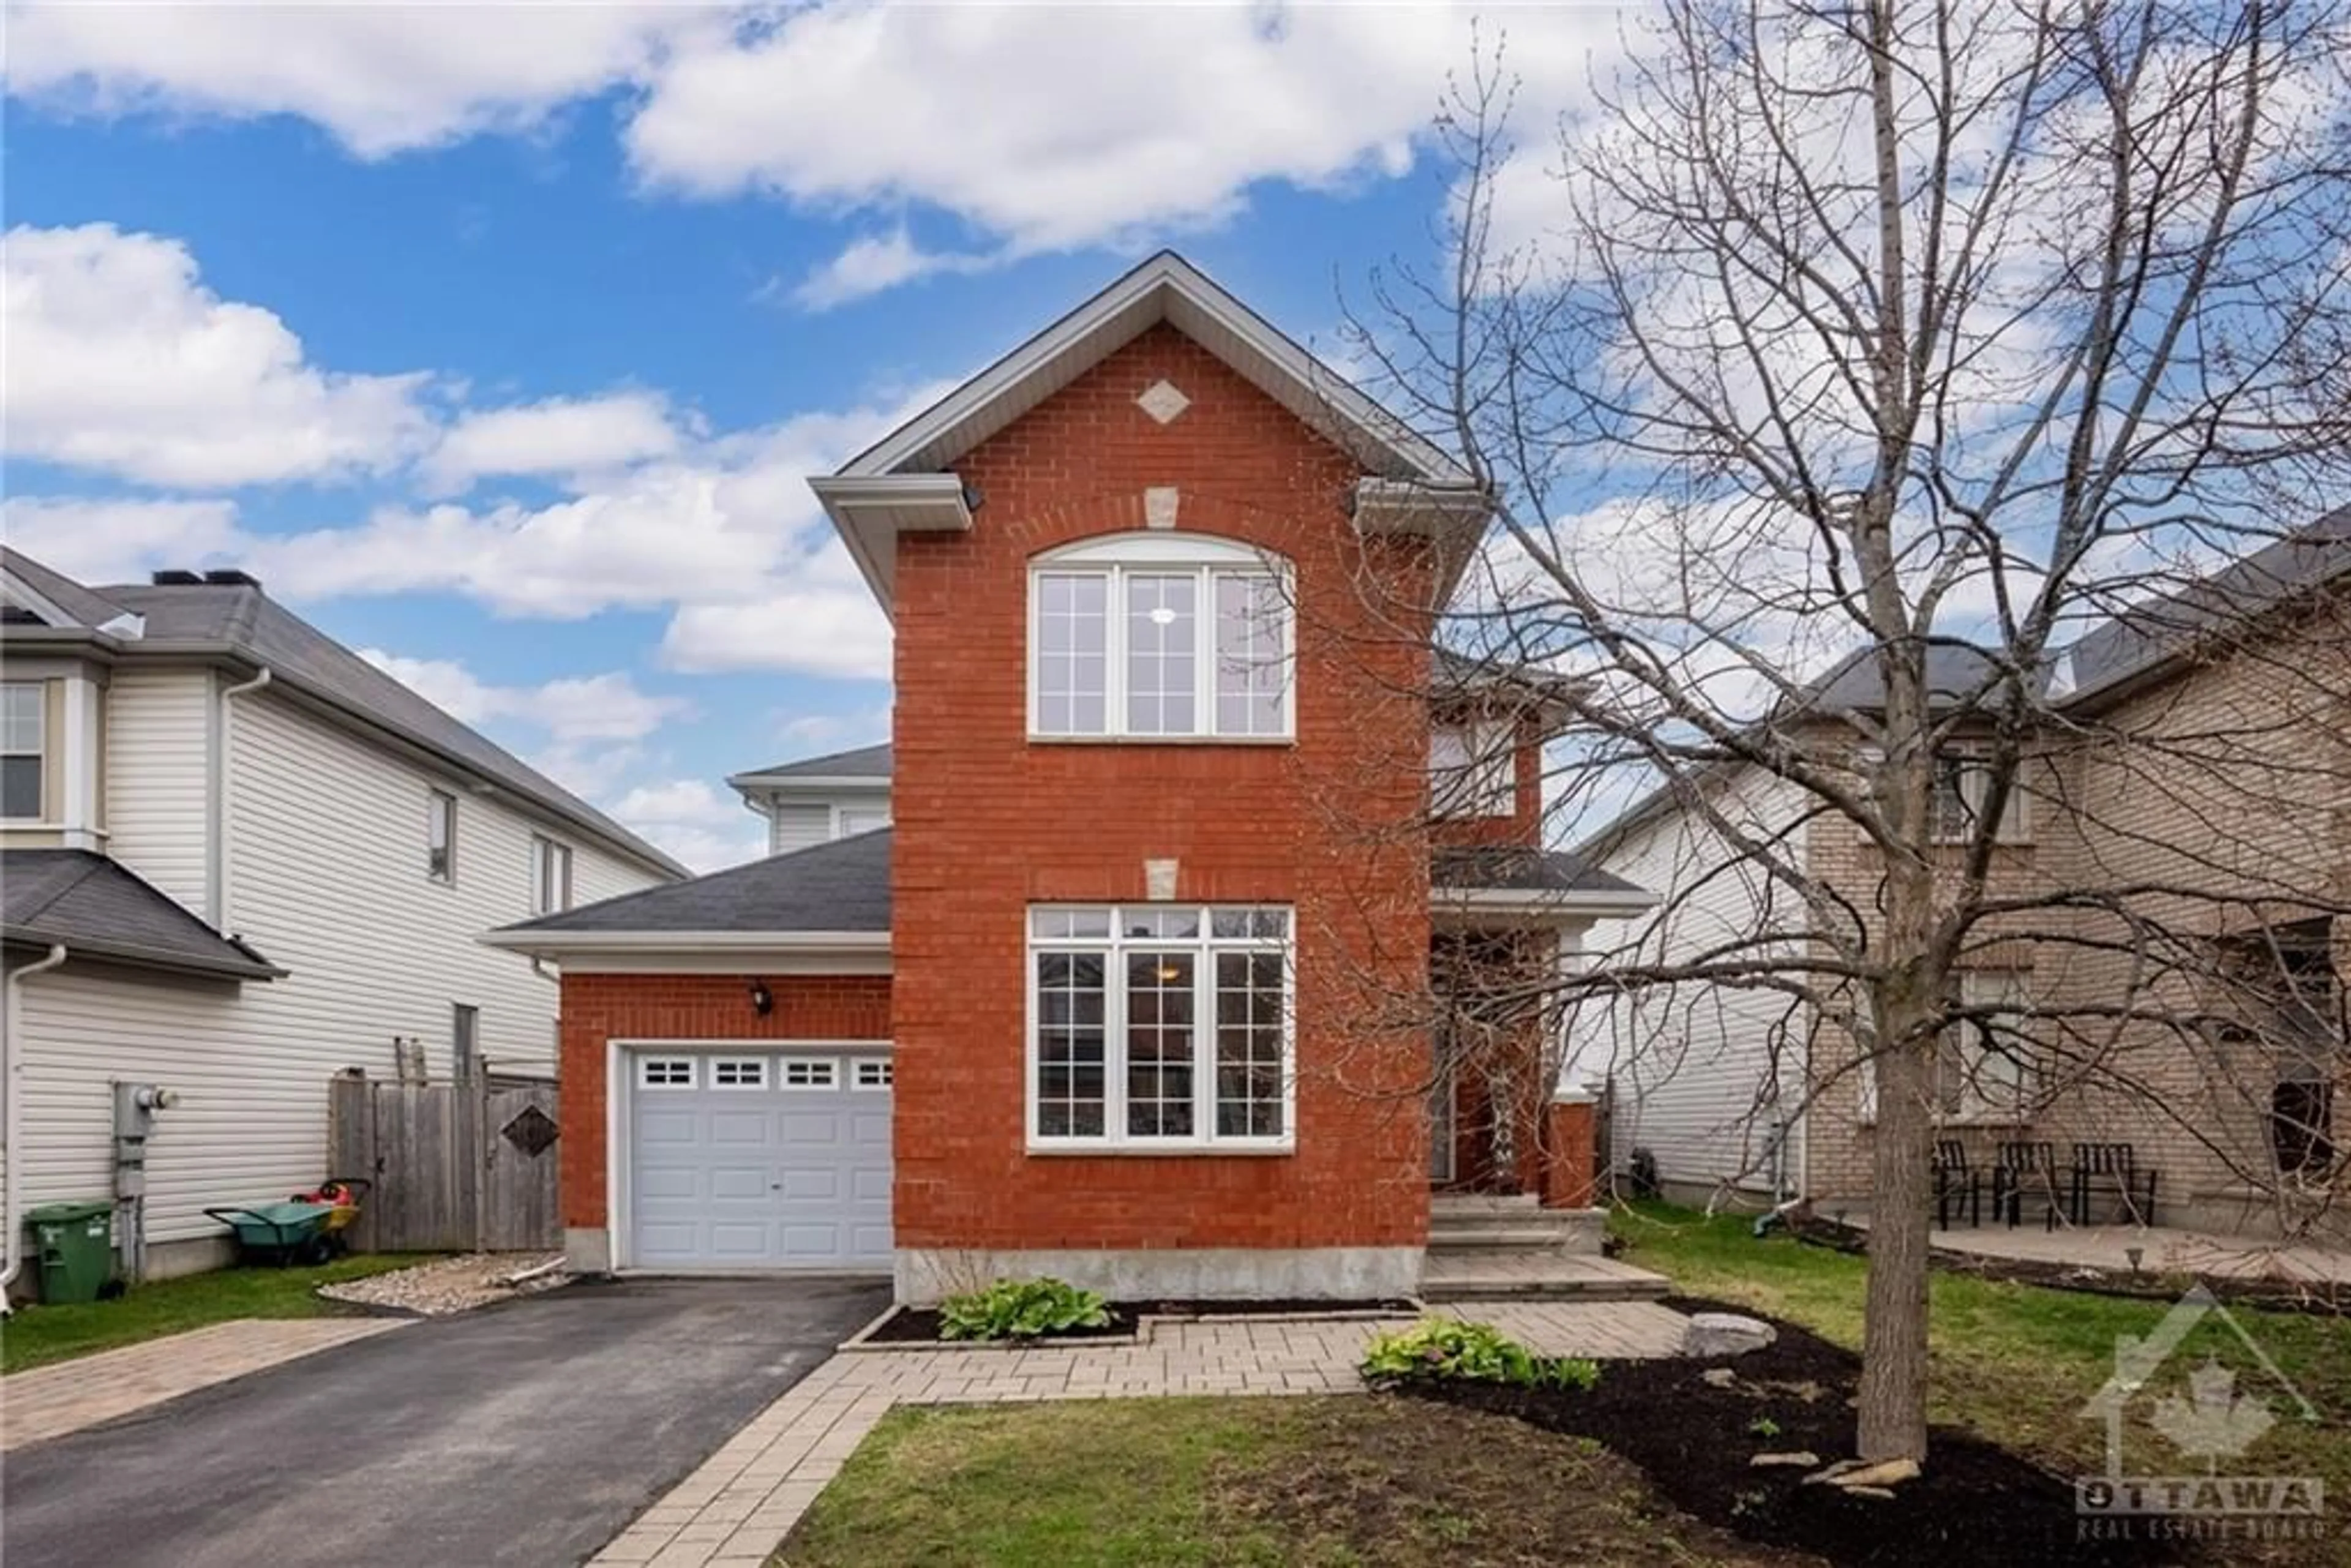 Home with brick exterior material for 237 ALLGROVE Way, Stittsville Ontario K2S 2G1